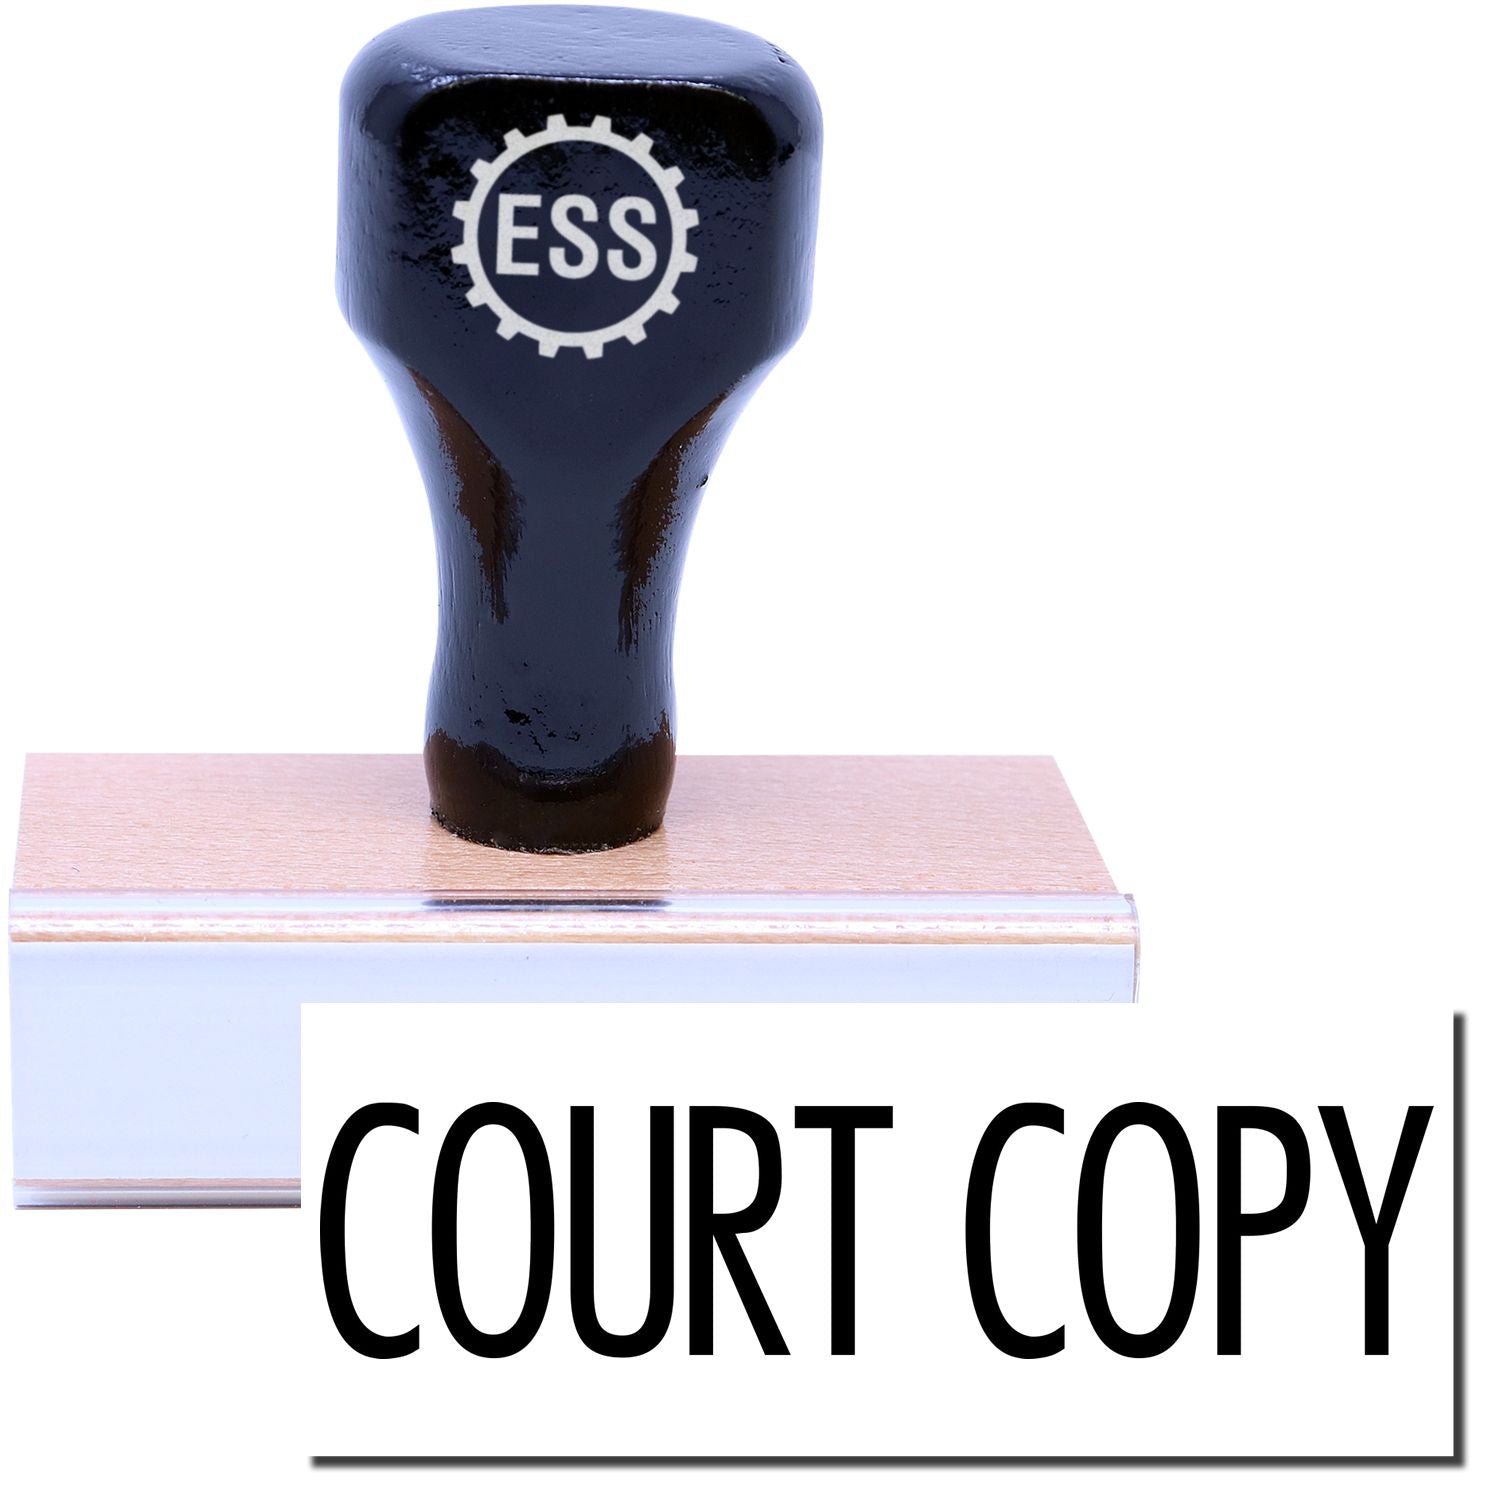 A stock office rubber stamp with a stamped image showing how the text "COURT COPY" in a narrow font is displayed after stamping.